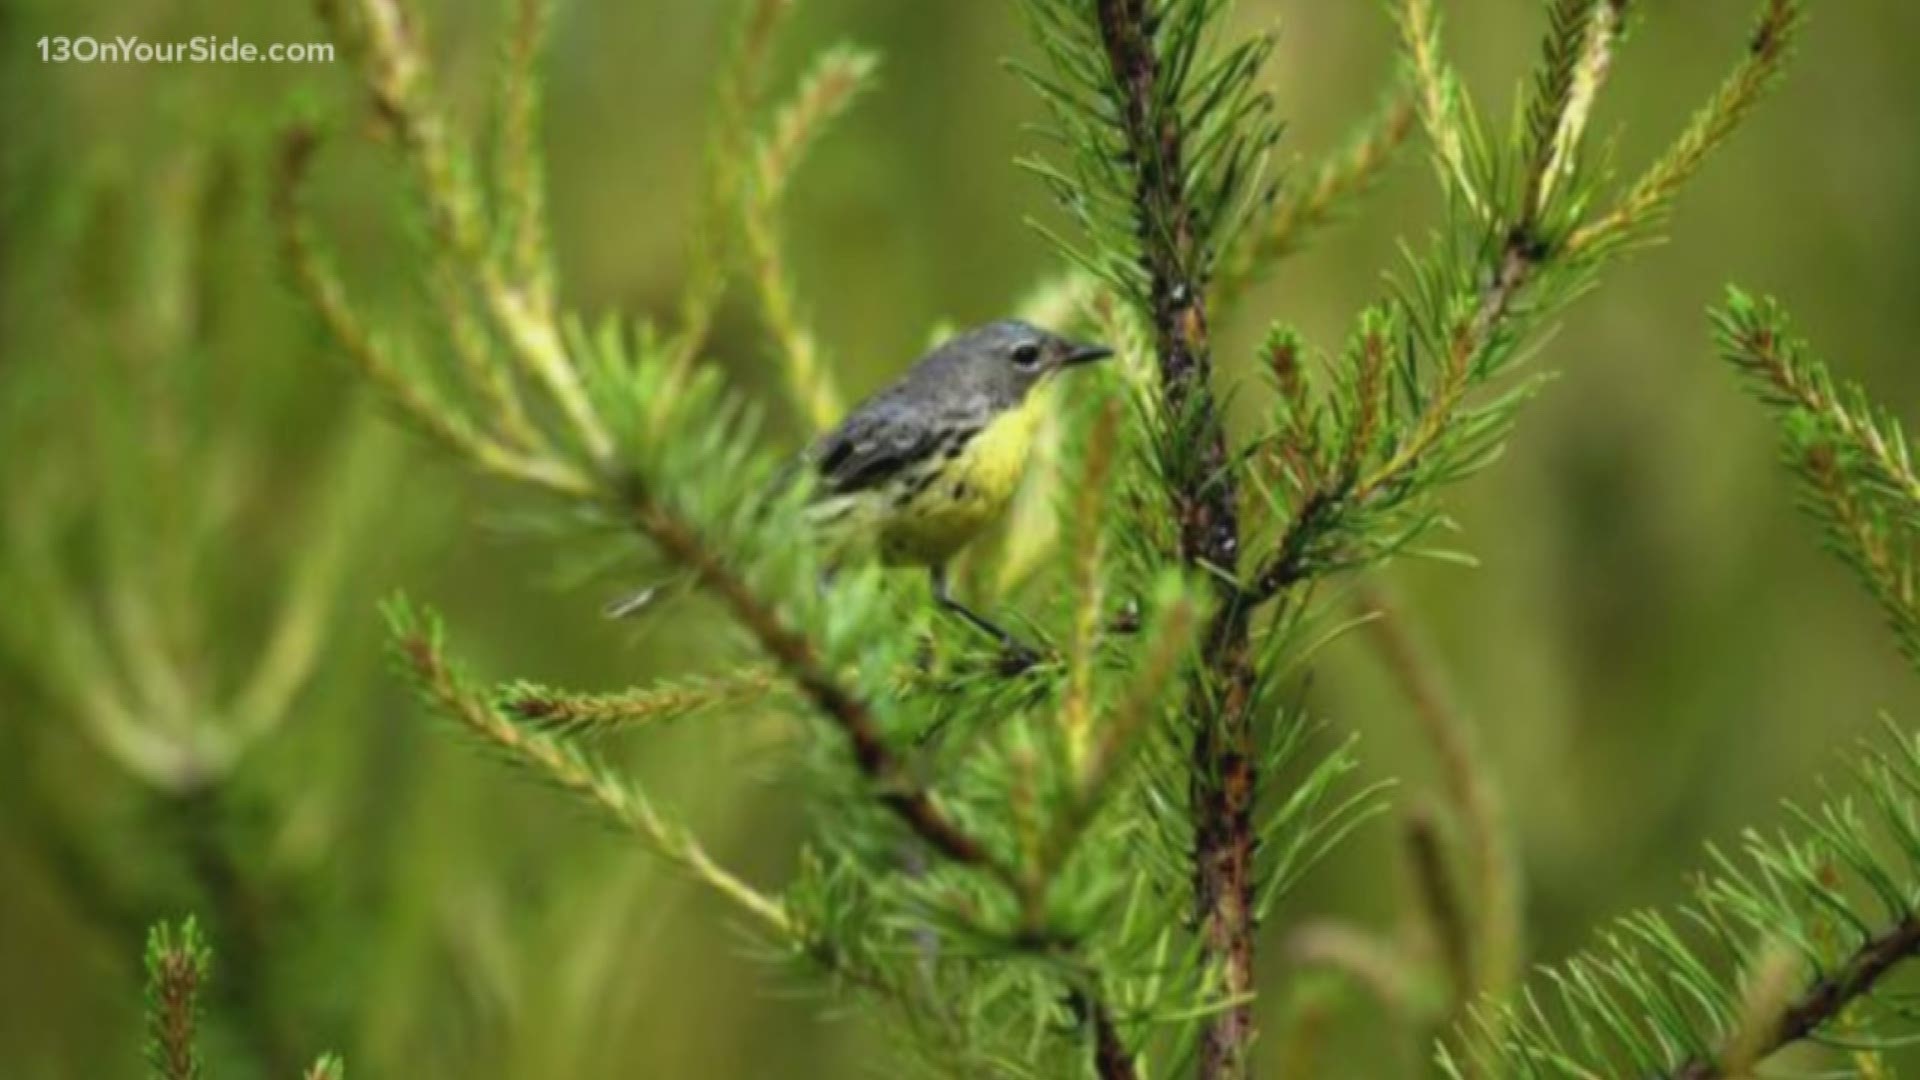 The federal government said it will remove the Kirtland's warbler from its list of protected species, finding the small, yellow-bellied songbird had recovered.